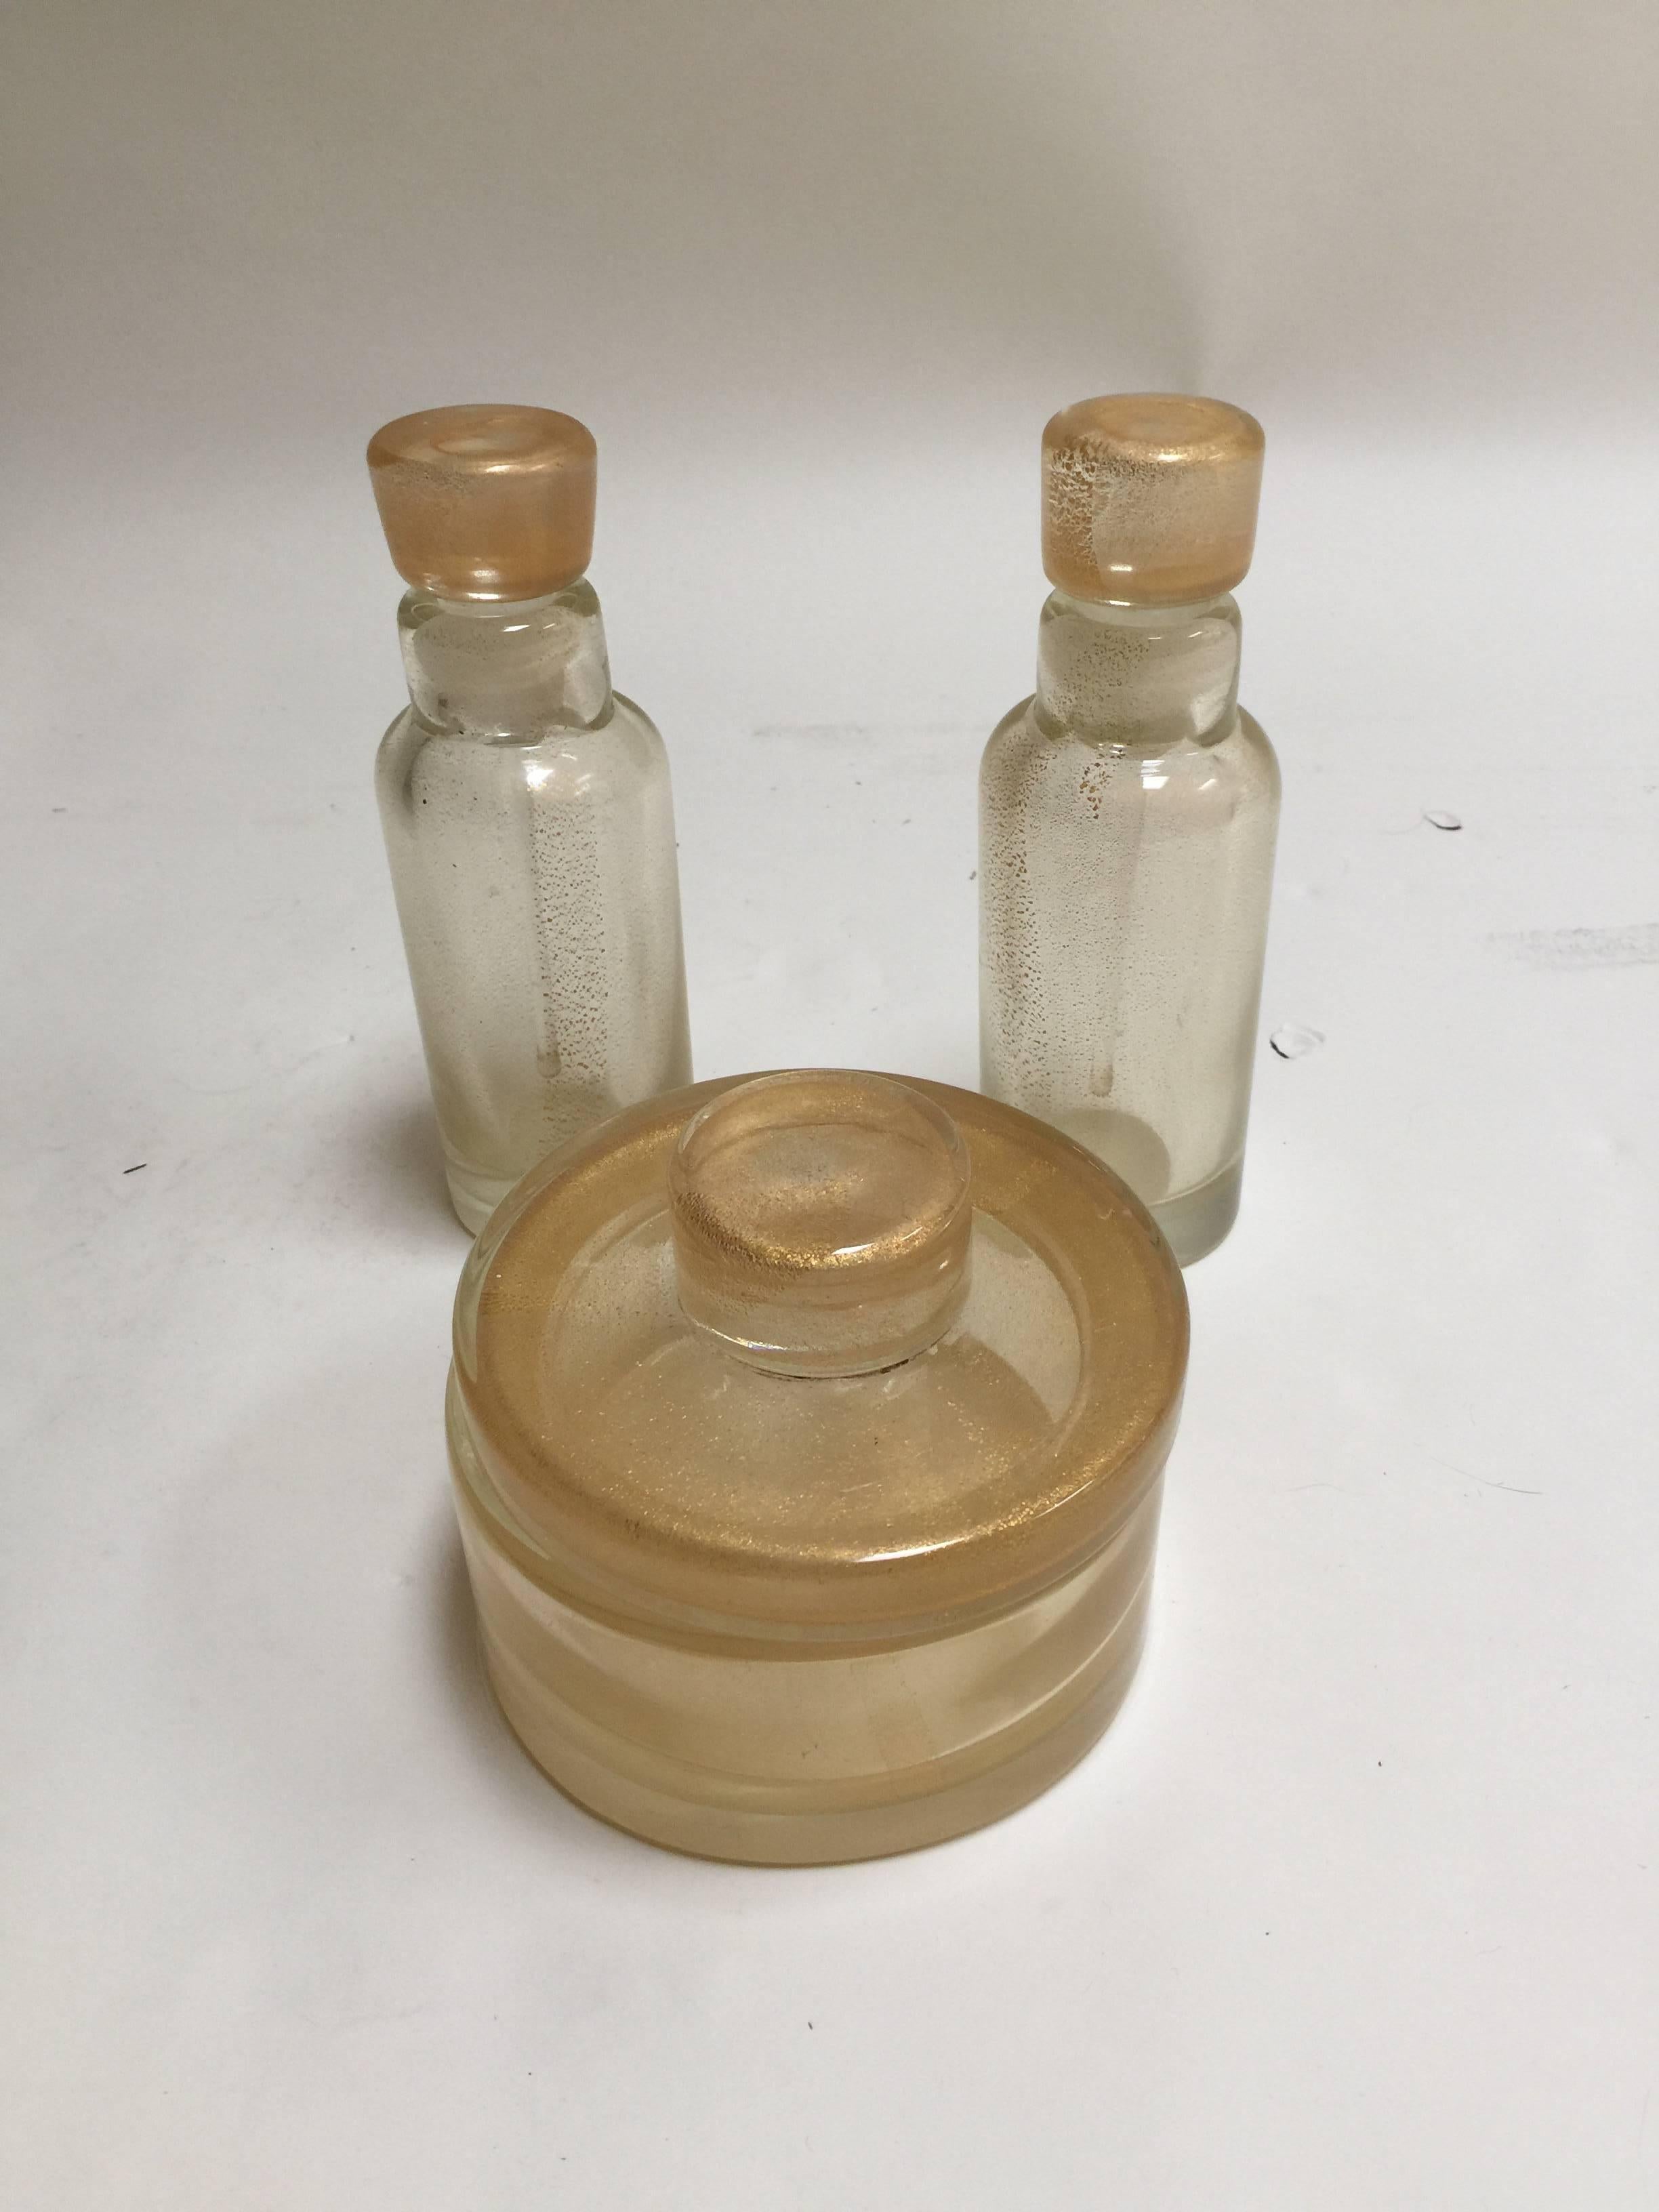 Heavy blown glass powder container and two tall perfume/barber bottles.
Powder jar 5.5 x 4.5